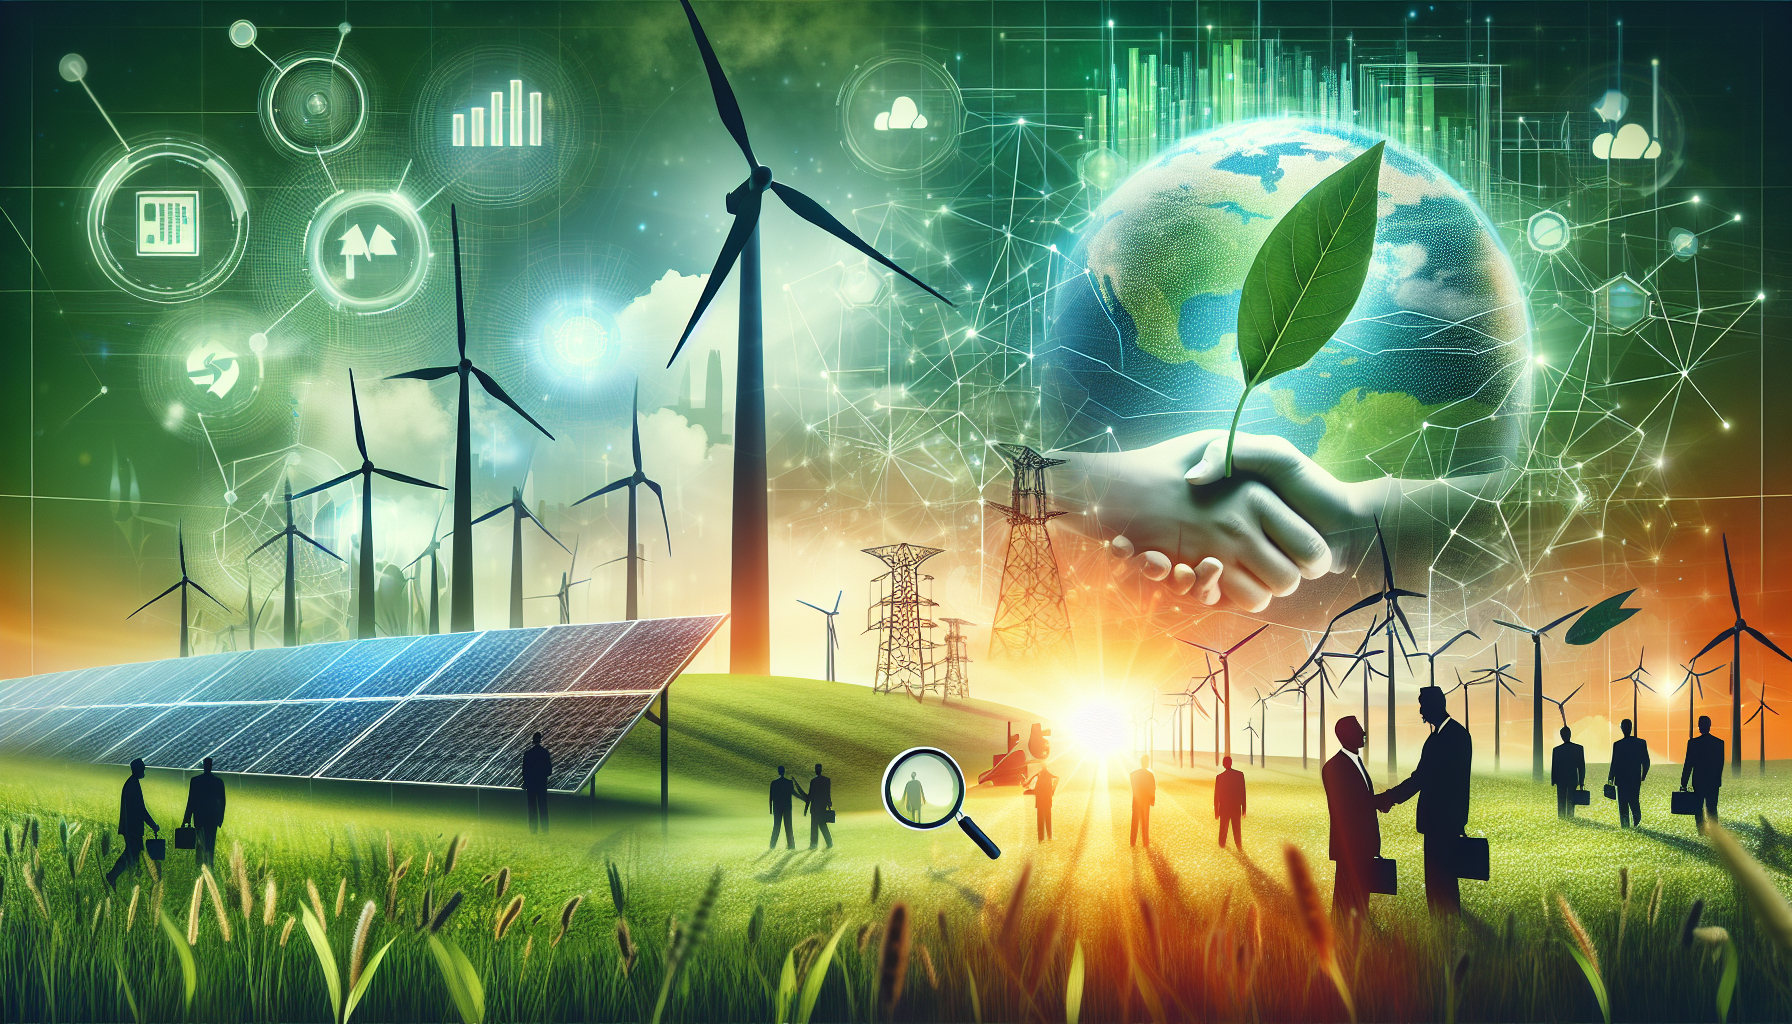 Illustration of green technology and sustainability in the energy sector